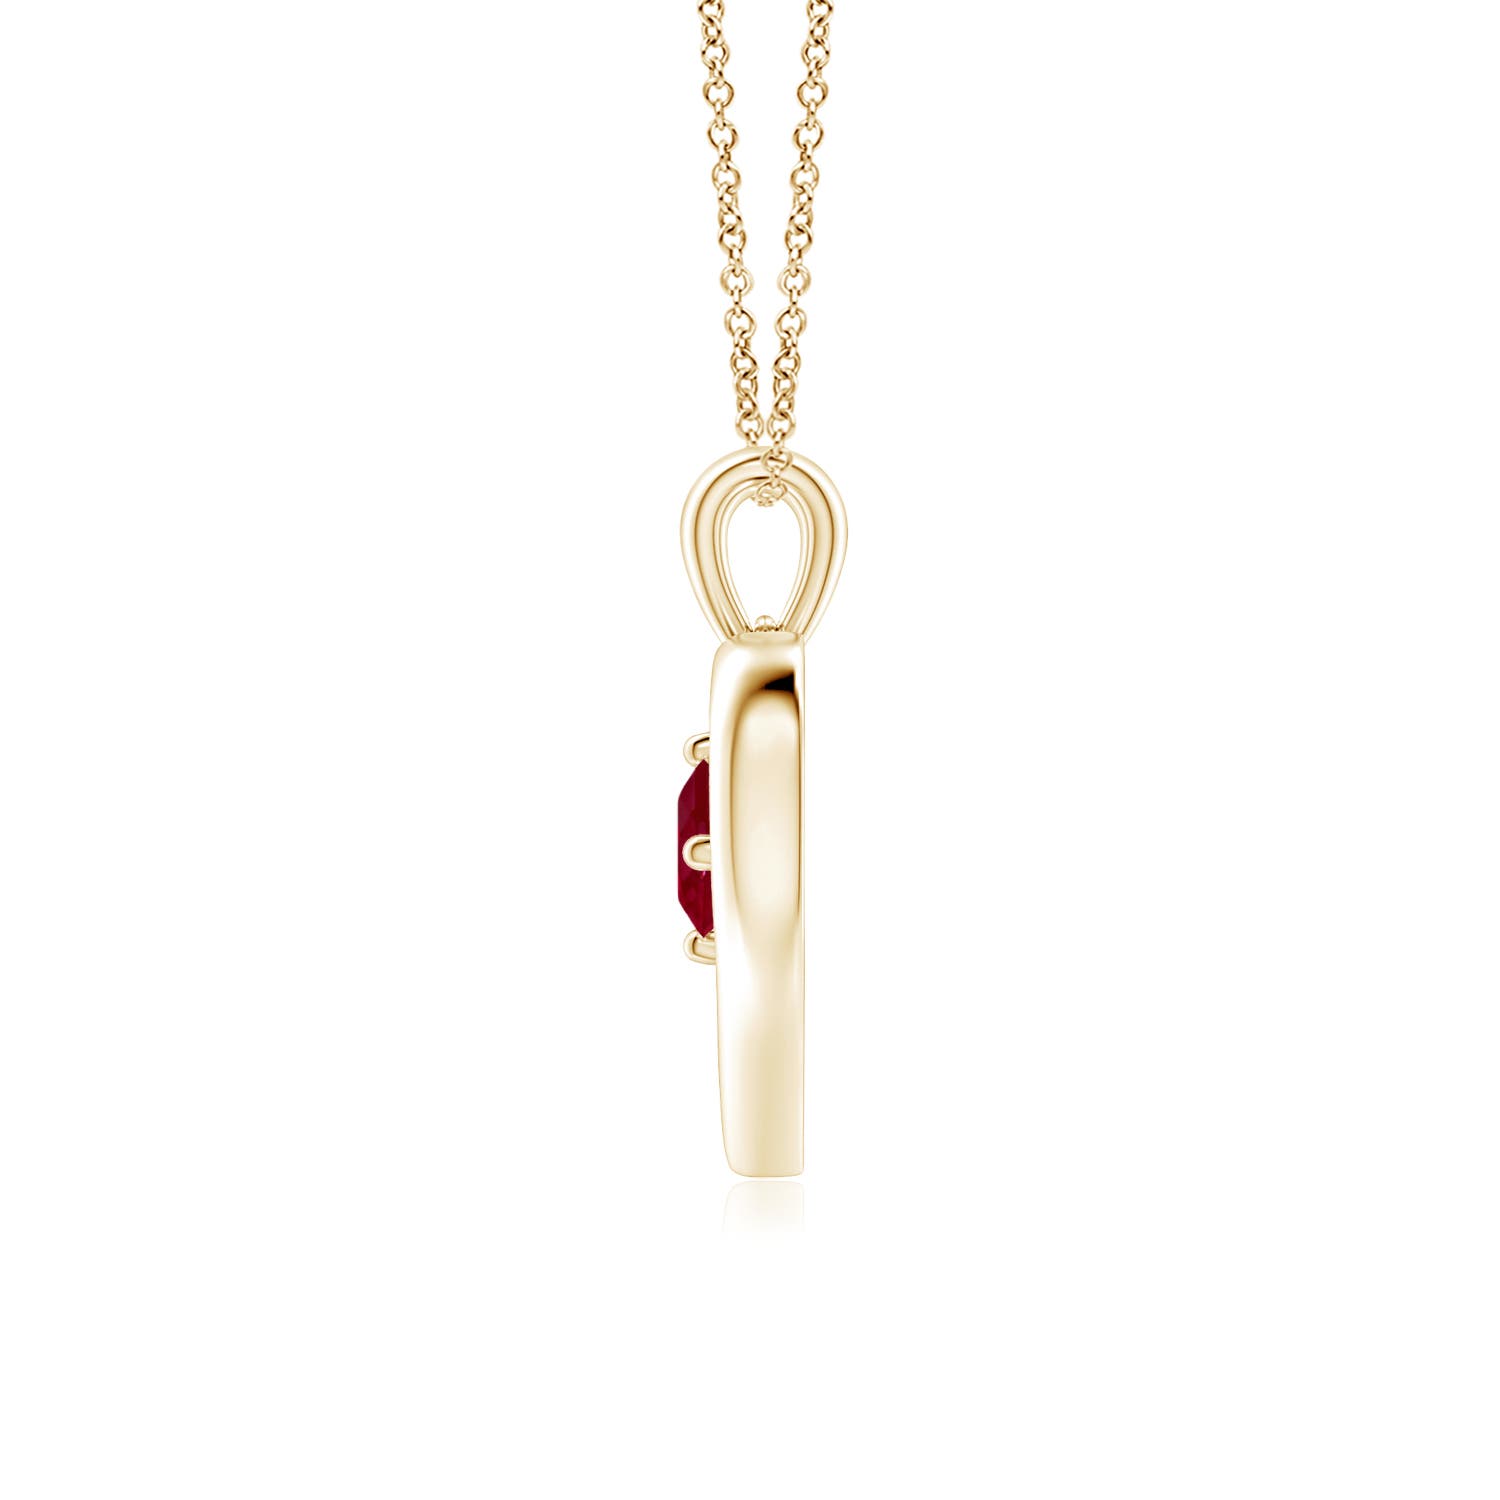 AA - Ruby / 0.34 CT / 14 KT Yellow Gold